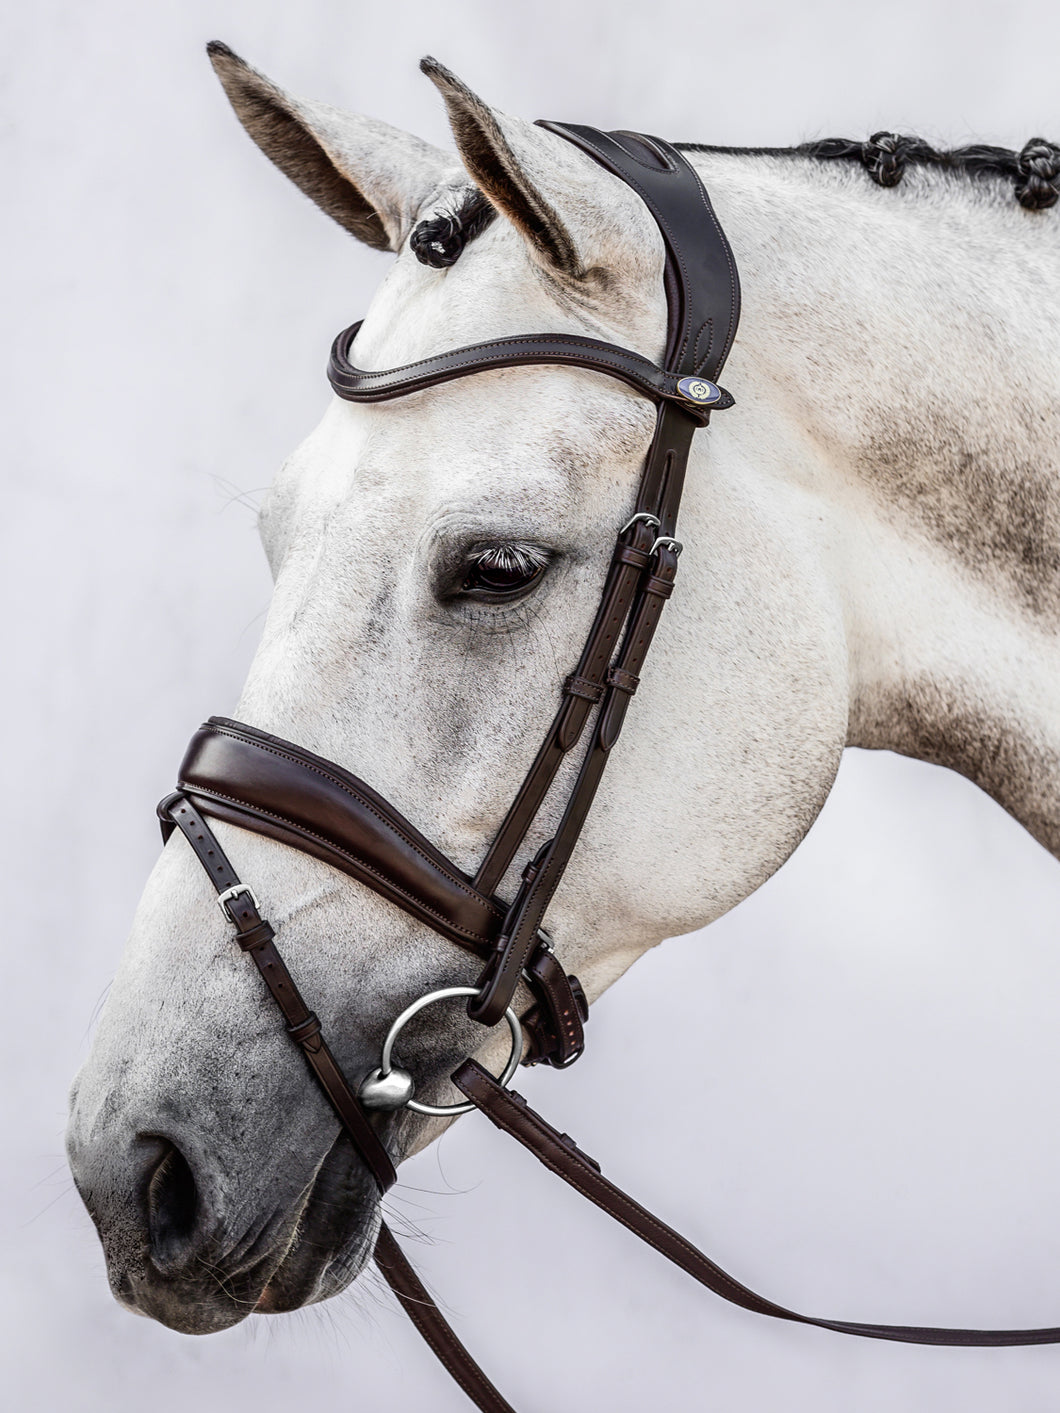 One of the most anatomical dressage bridles on the market. Made out of ECO-friendly English leather